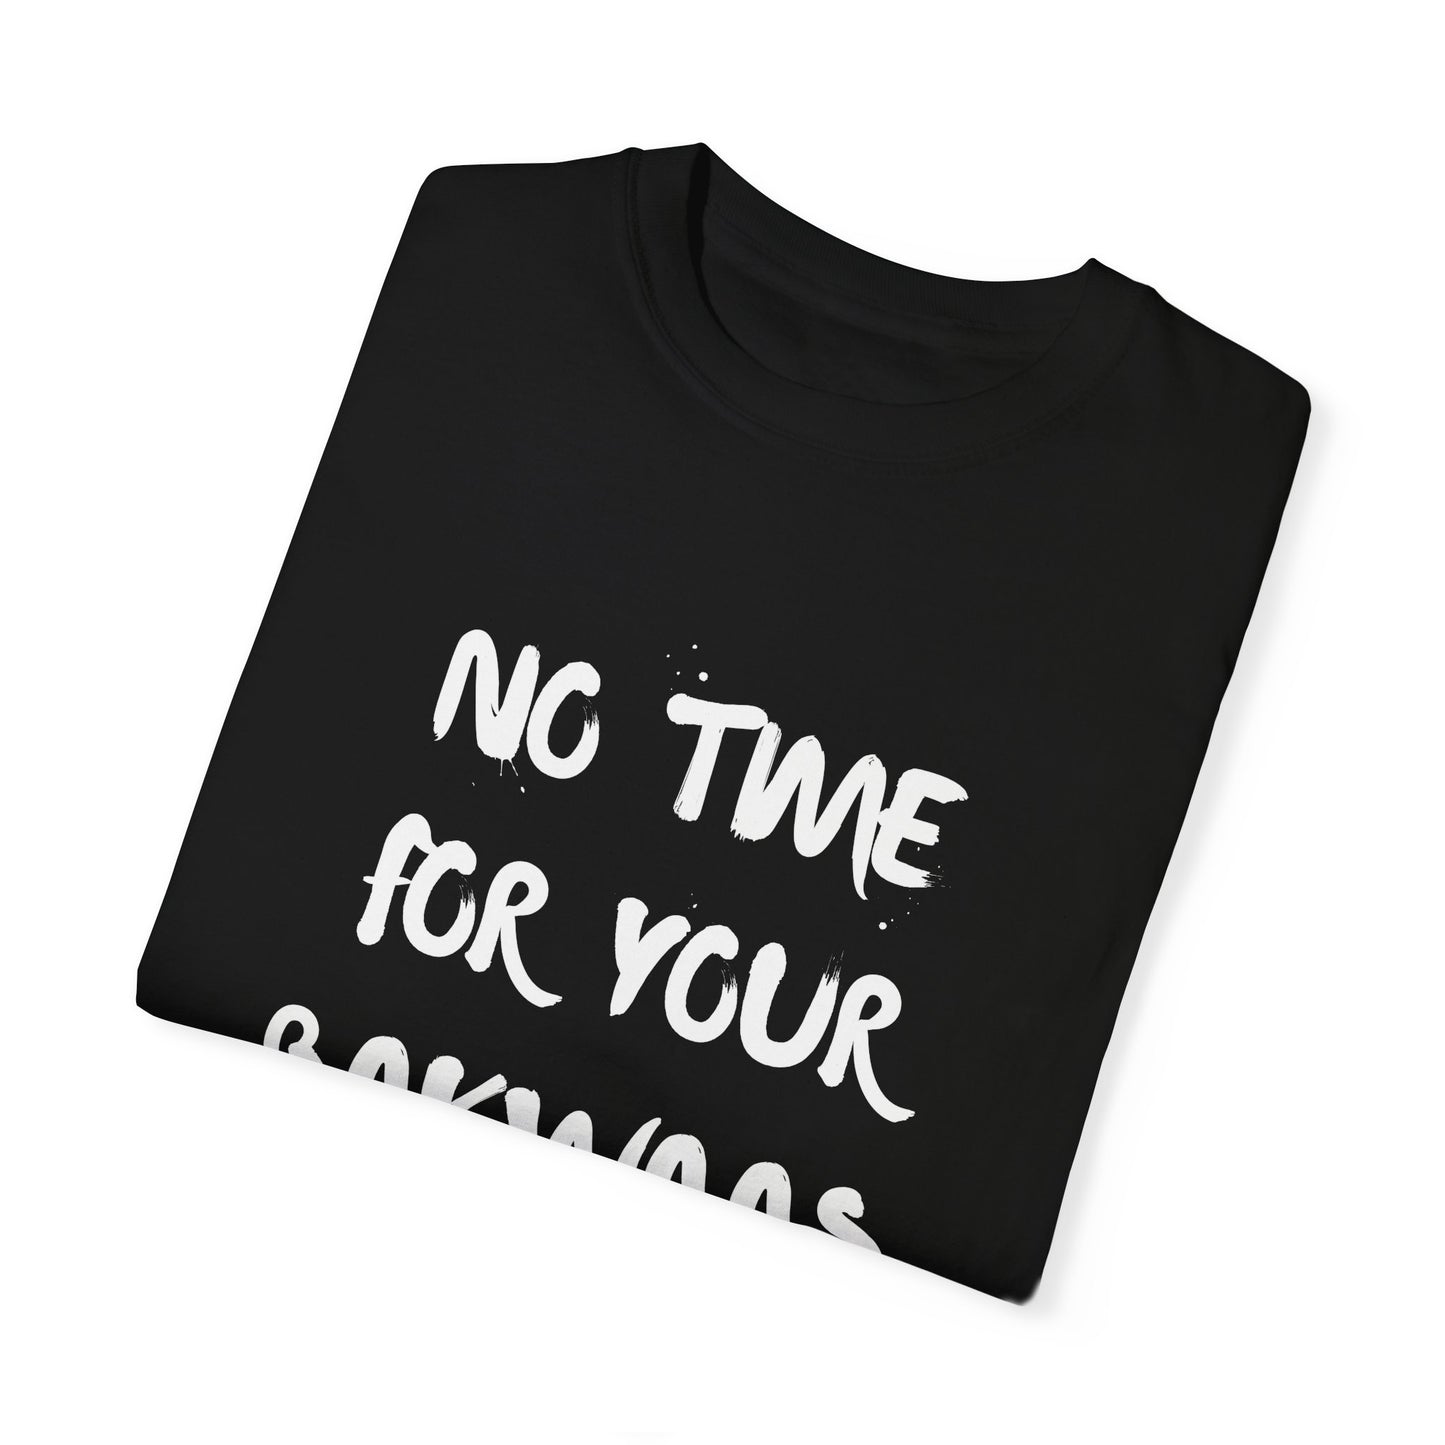 No Time For Your Bakwaas T-Shirt